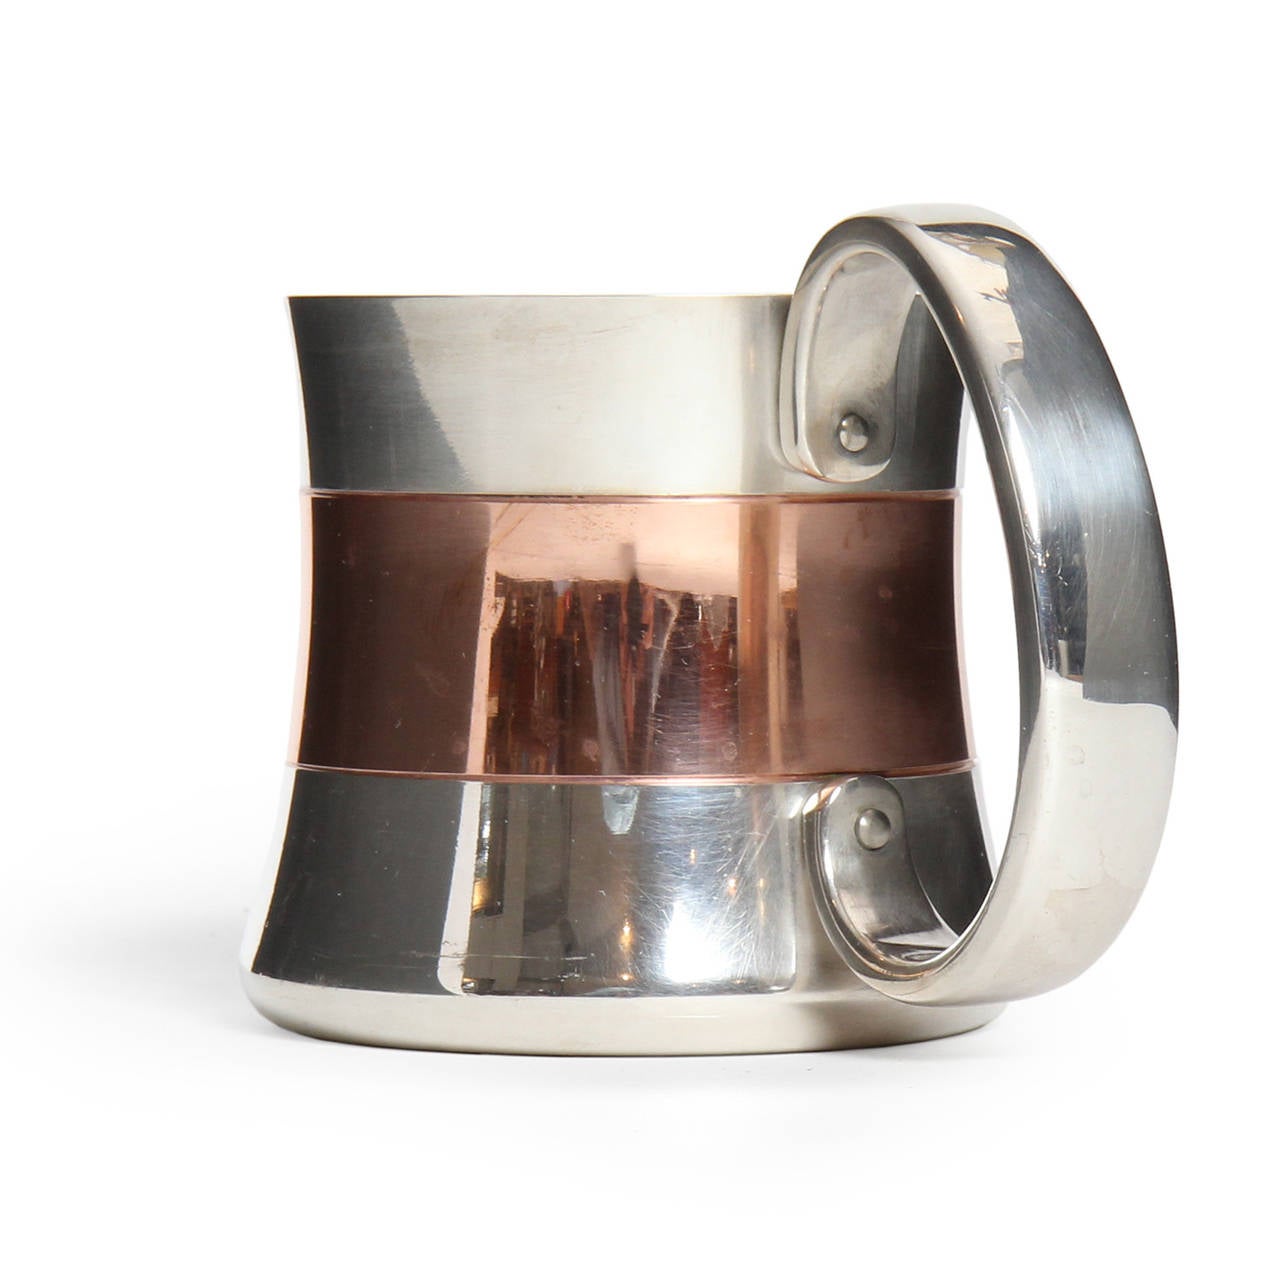 A fine silver plated beer mug of corseted form having a central copper band and a generous sculptural handle.